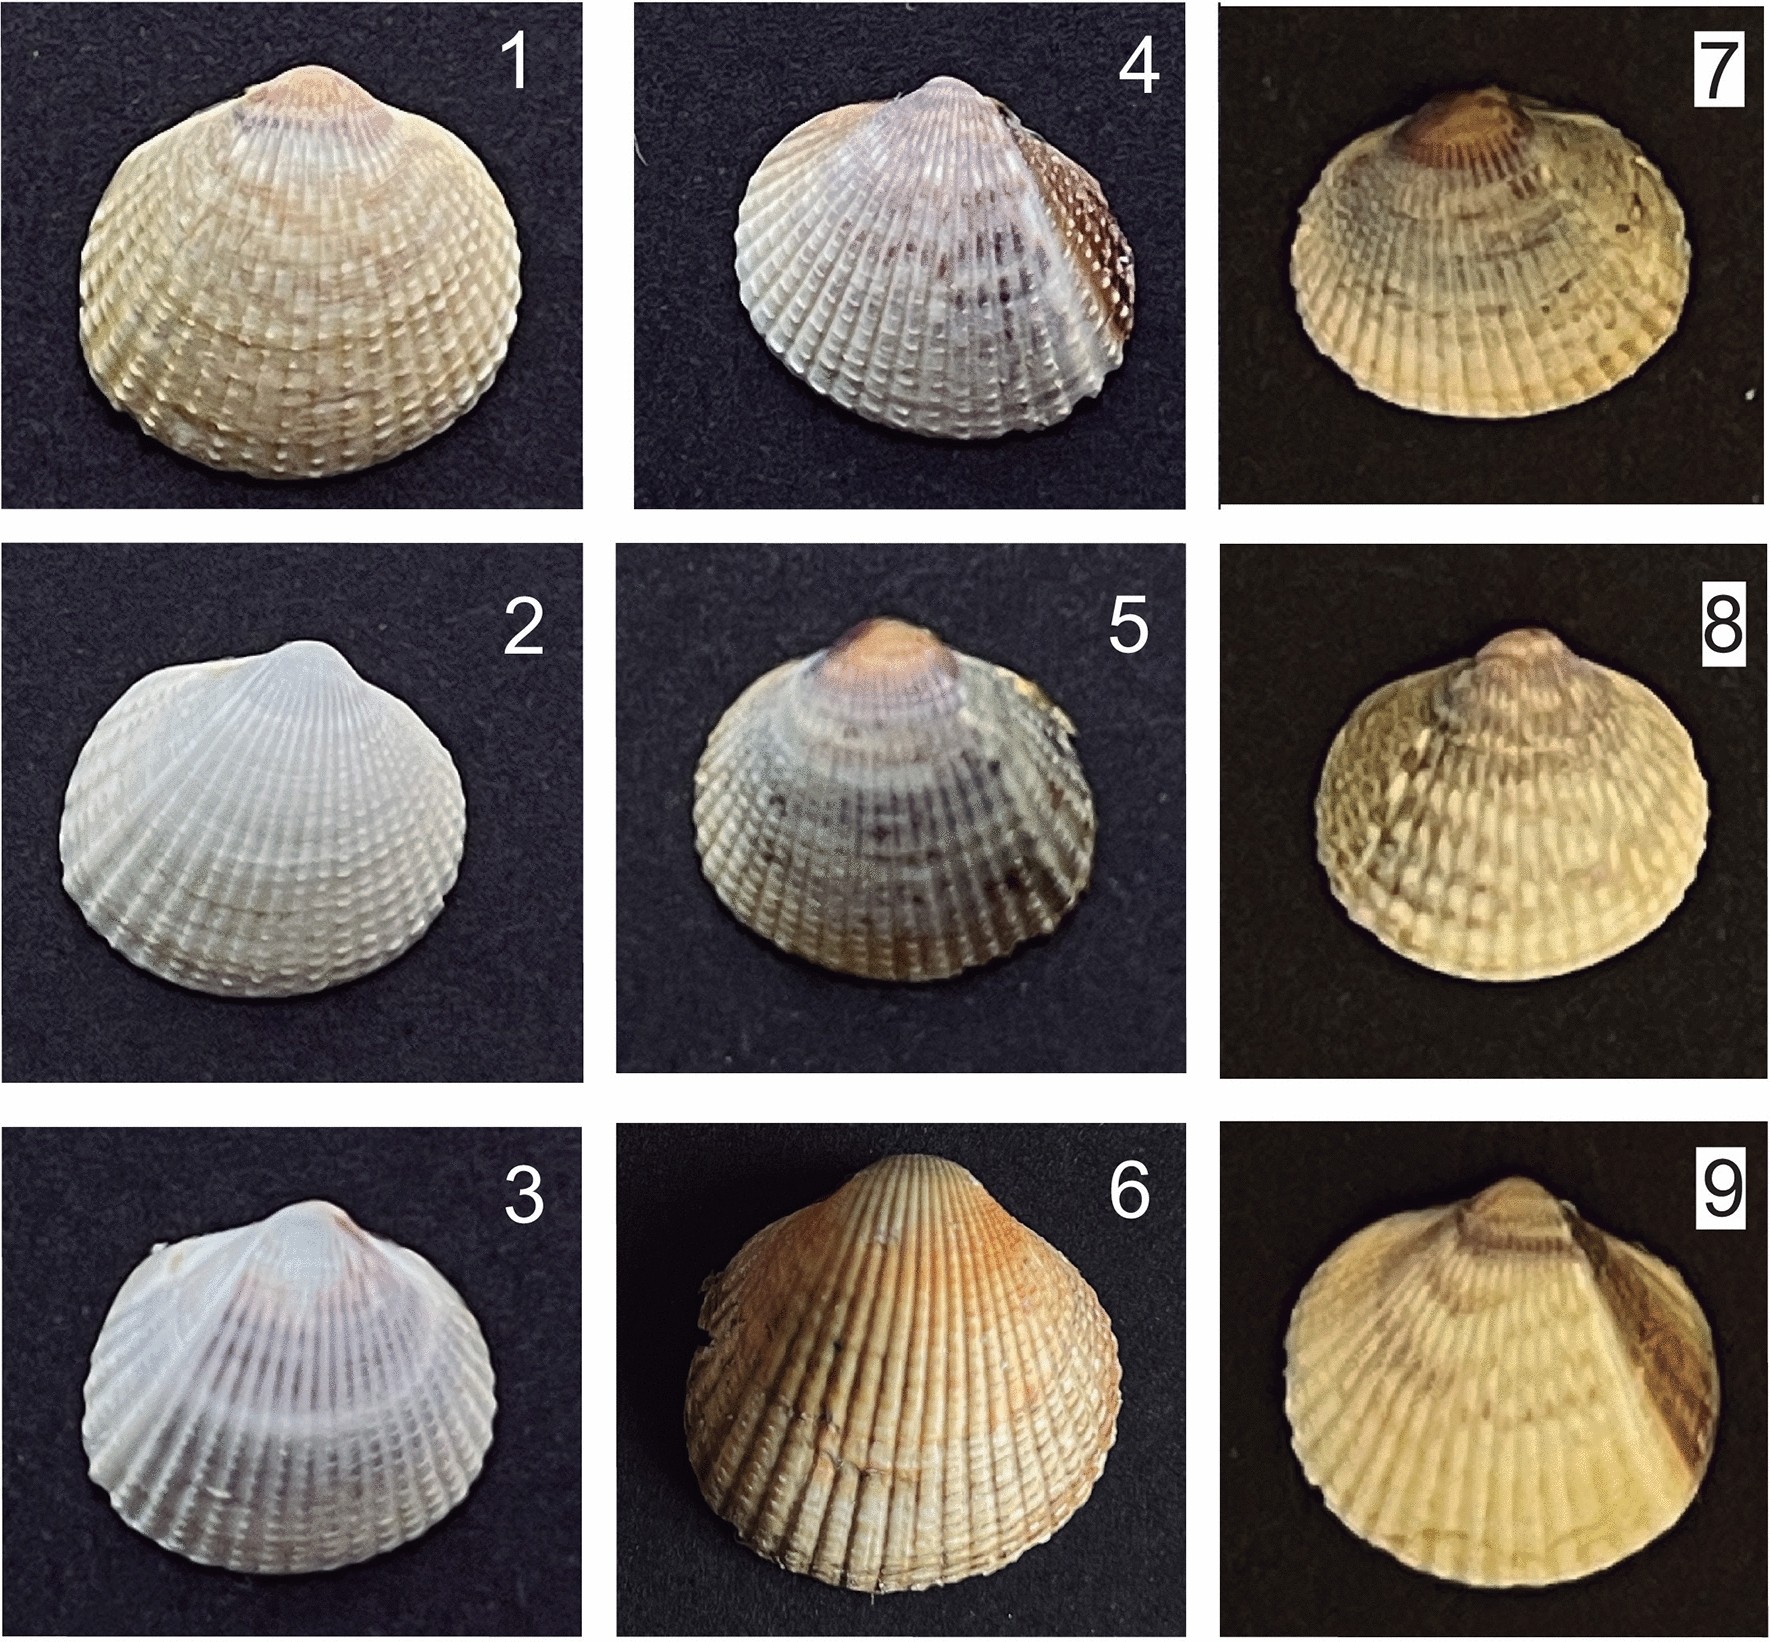 The first high-density genetic map of common cockle (Cerastoderma edule) reveals a major QTL controlling shell color variation Scientific Reports